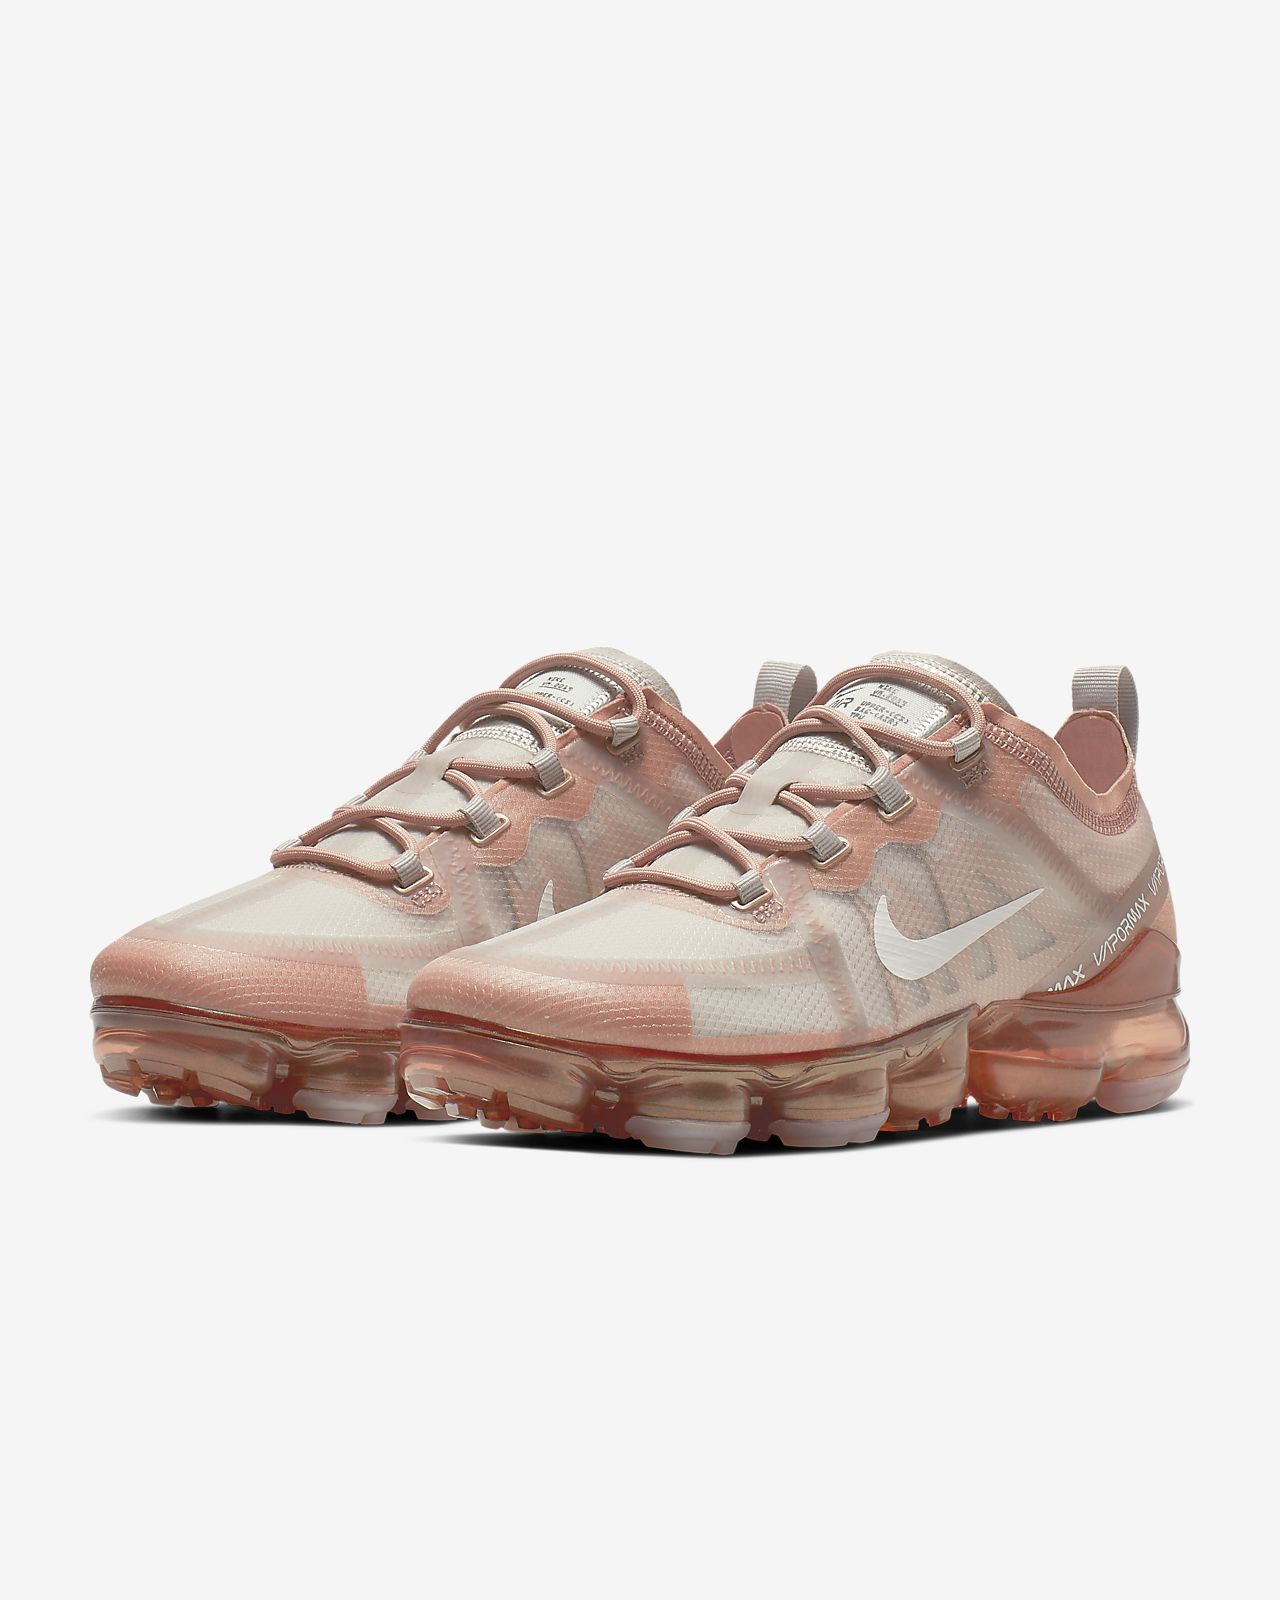 Nike Air Vapormax Womens Rose Gold On Sale, UP TO 61% OFF